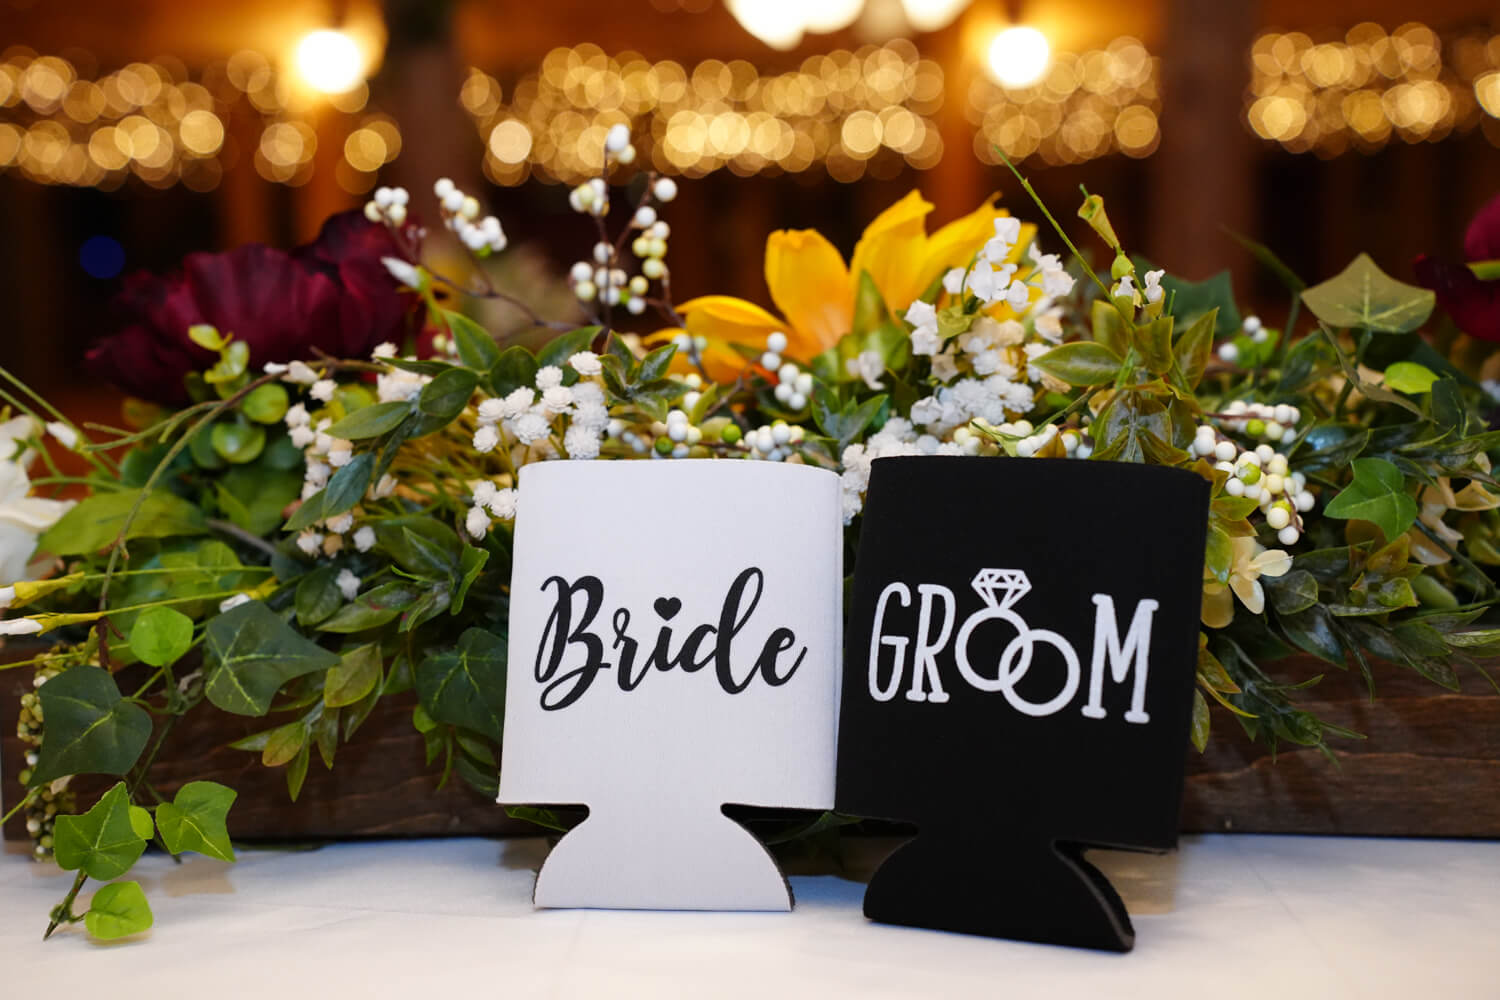 Bride and Groom koozies sitting on a reception table with warm string lights behind them